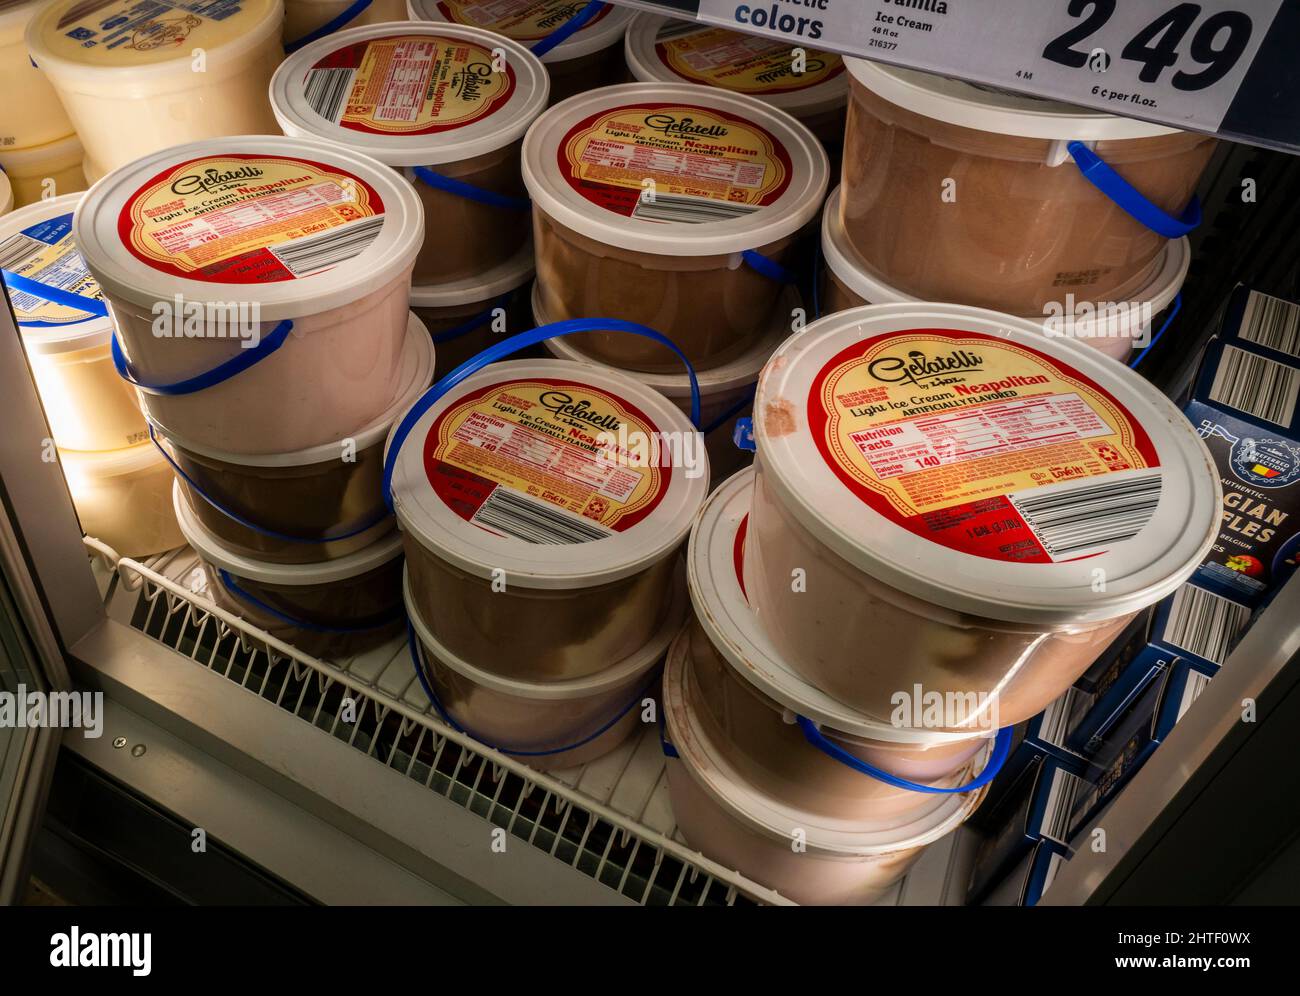 https://c8.alamy.com/comp/2HTF0WX/gallon-tubs-of-ice-cream-in-a-freezer-in-a-lidl-supermarket-in-harlem-in-new-york-on-wednesday-february-23-2022-global-unrest-in-the-ukraine-is-predicted-to-take-its-toll-on-consumers-at-they-cut-back-on-spending-americans-are-encountering-the-highest-inflation-rate-in-40-years-as-consumer-spending-fell-last-month-the-most-since-february-2021-richard-b-levine-2HTF0WX.jpg